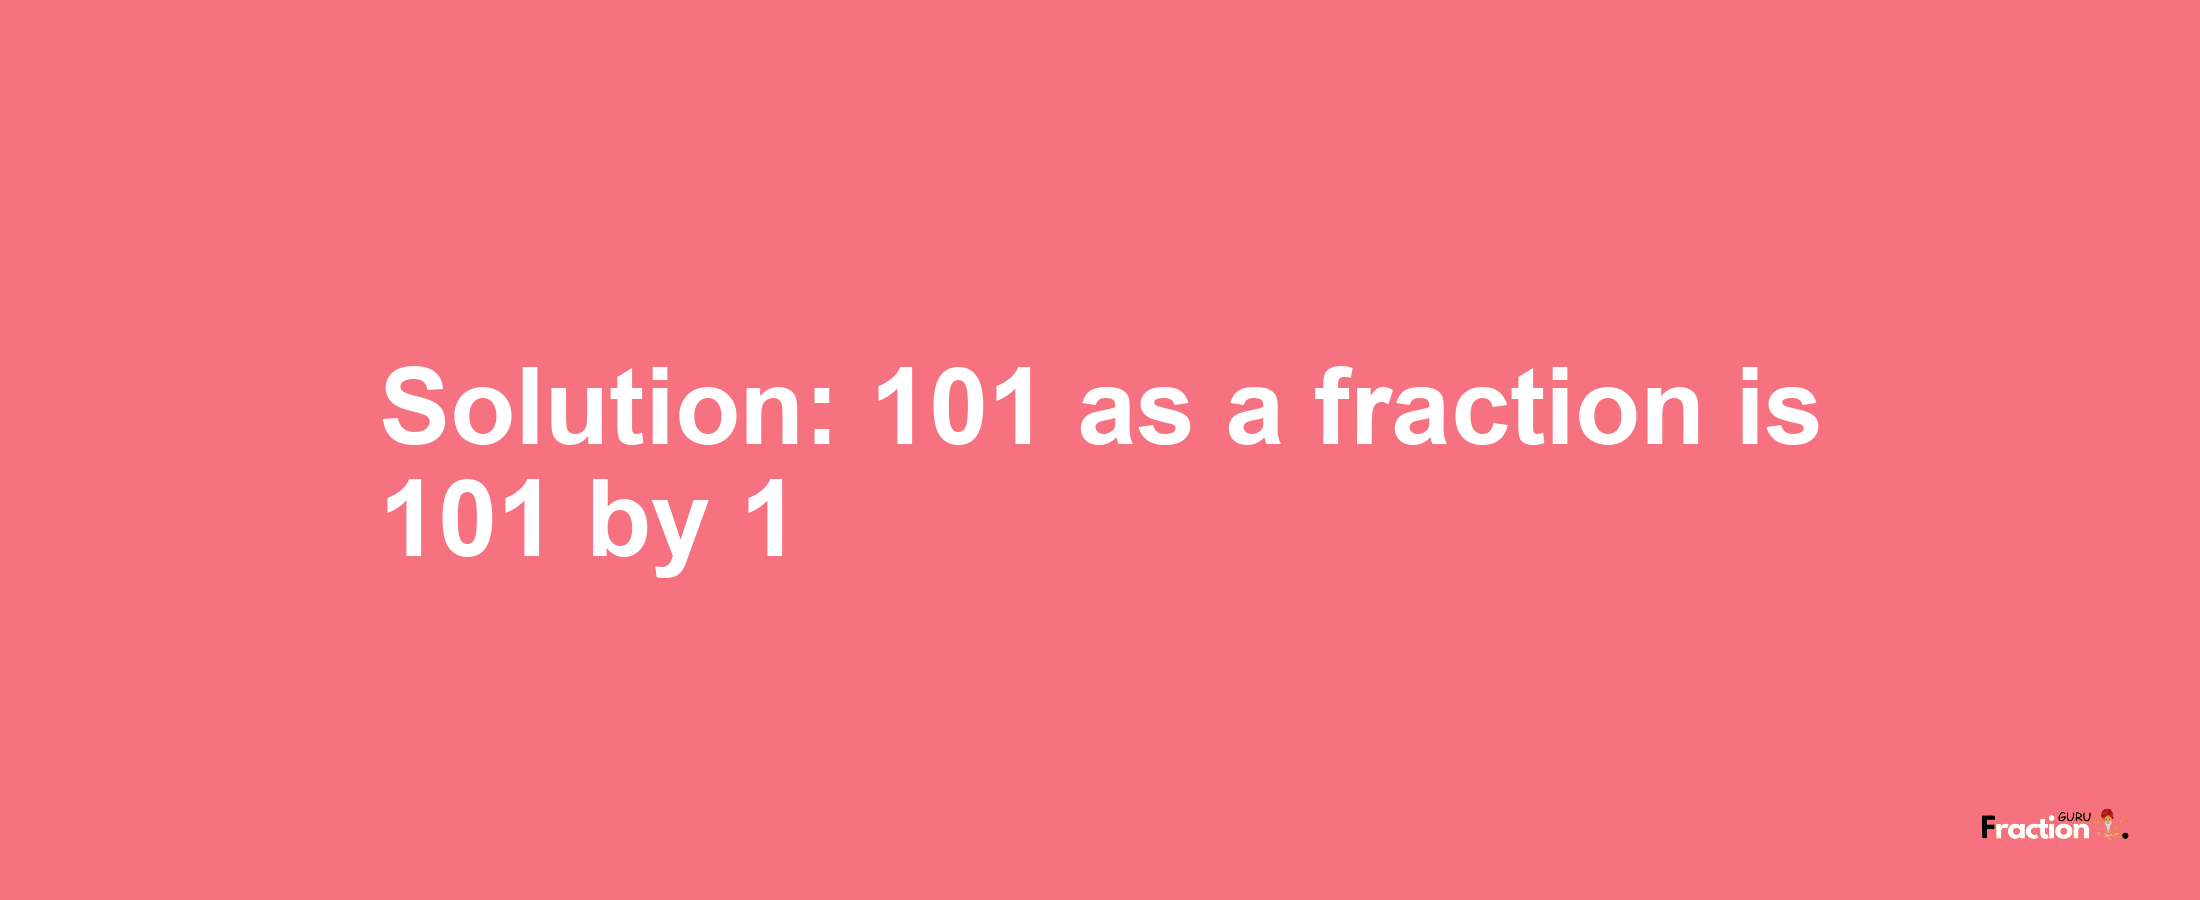 Solution:101 as a fraction is 101/1